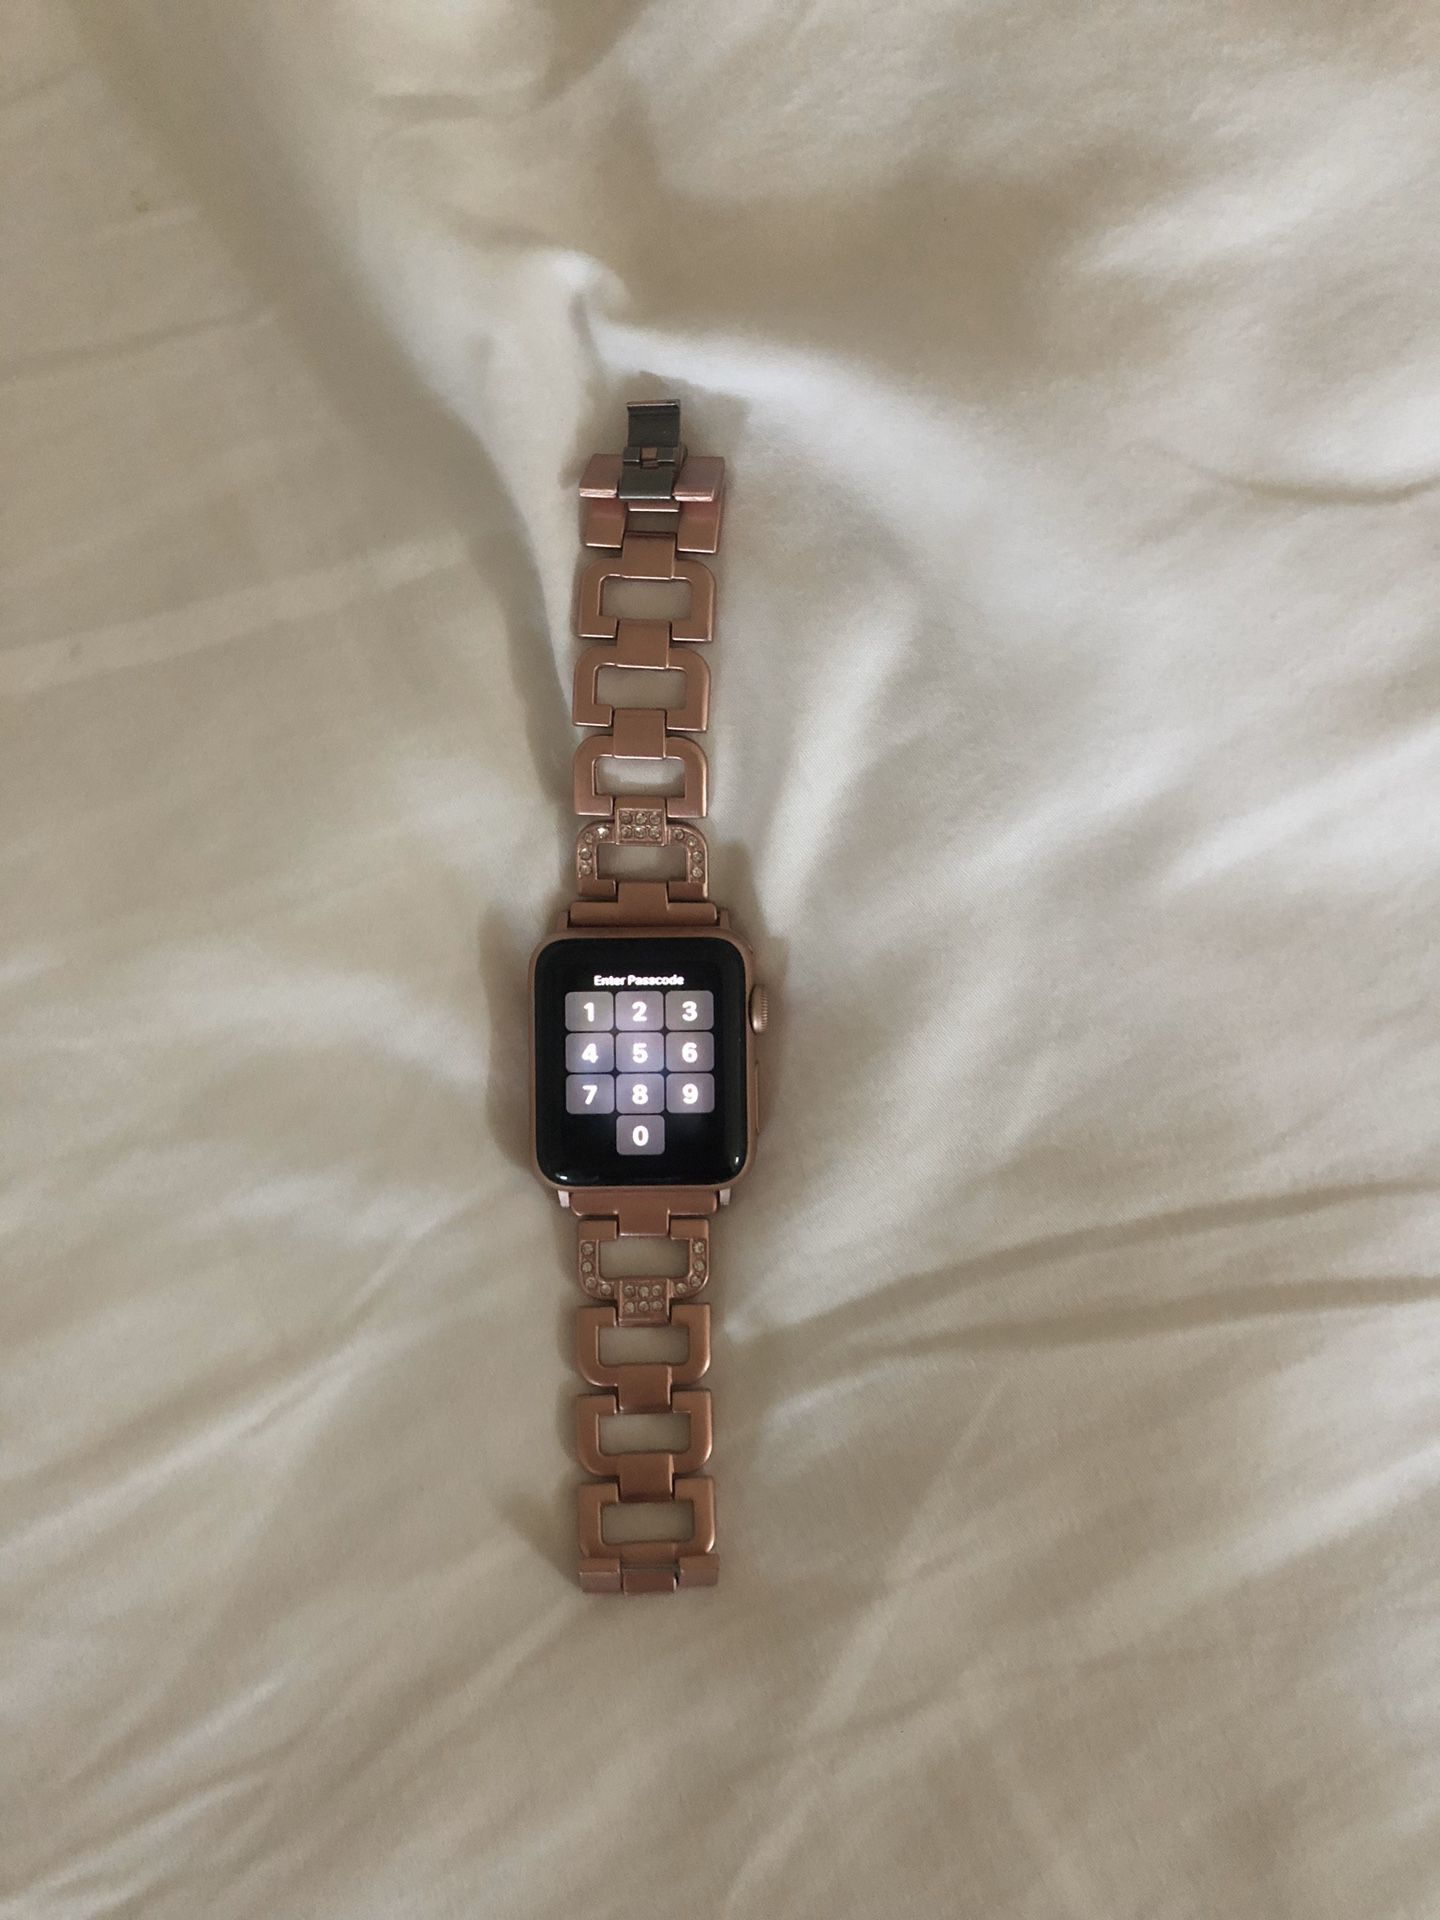 Apple Watch Series 3 with Cellular and GPS with FOUR bands- Great Condition